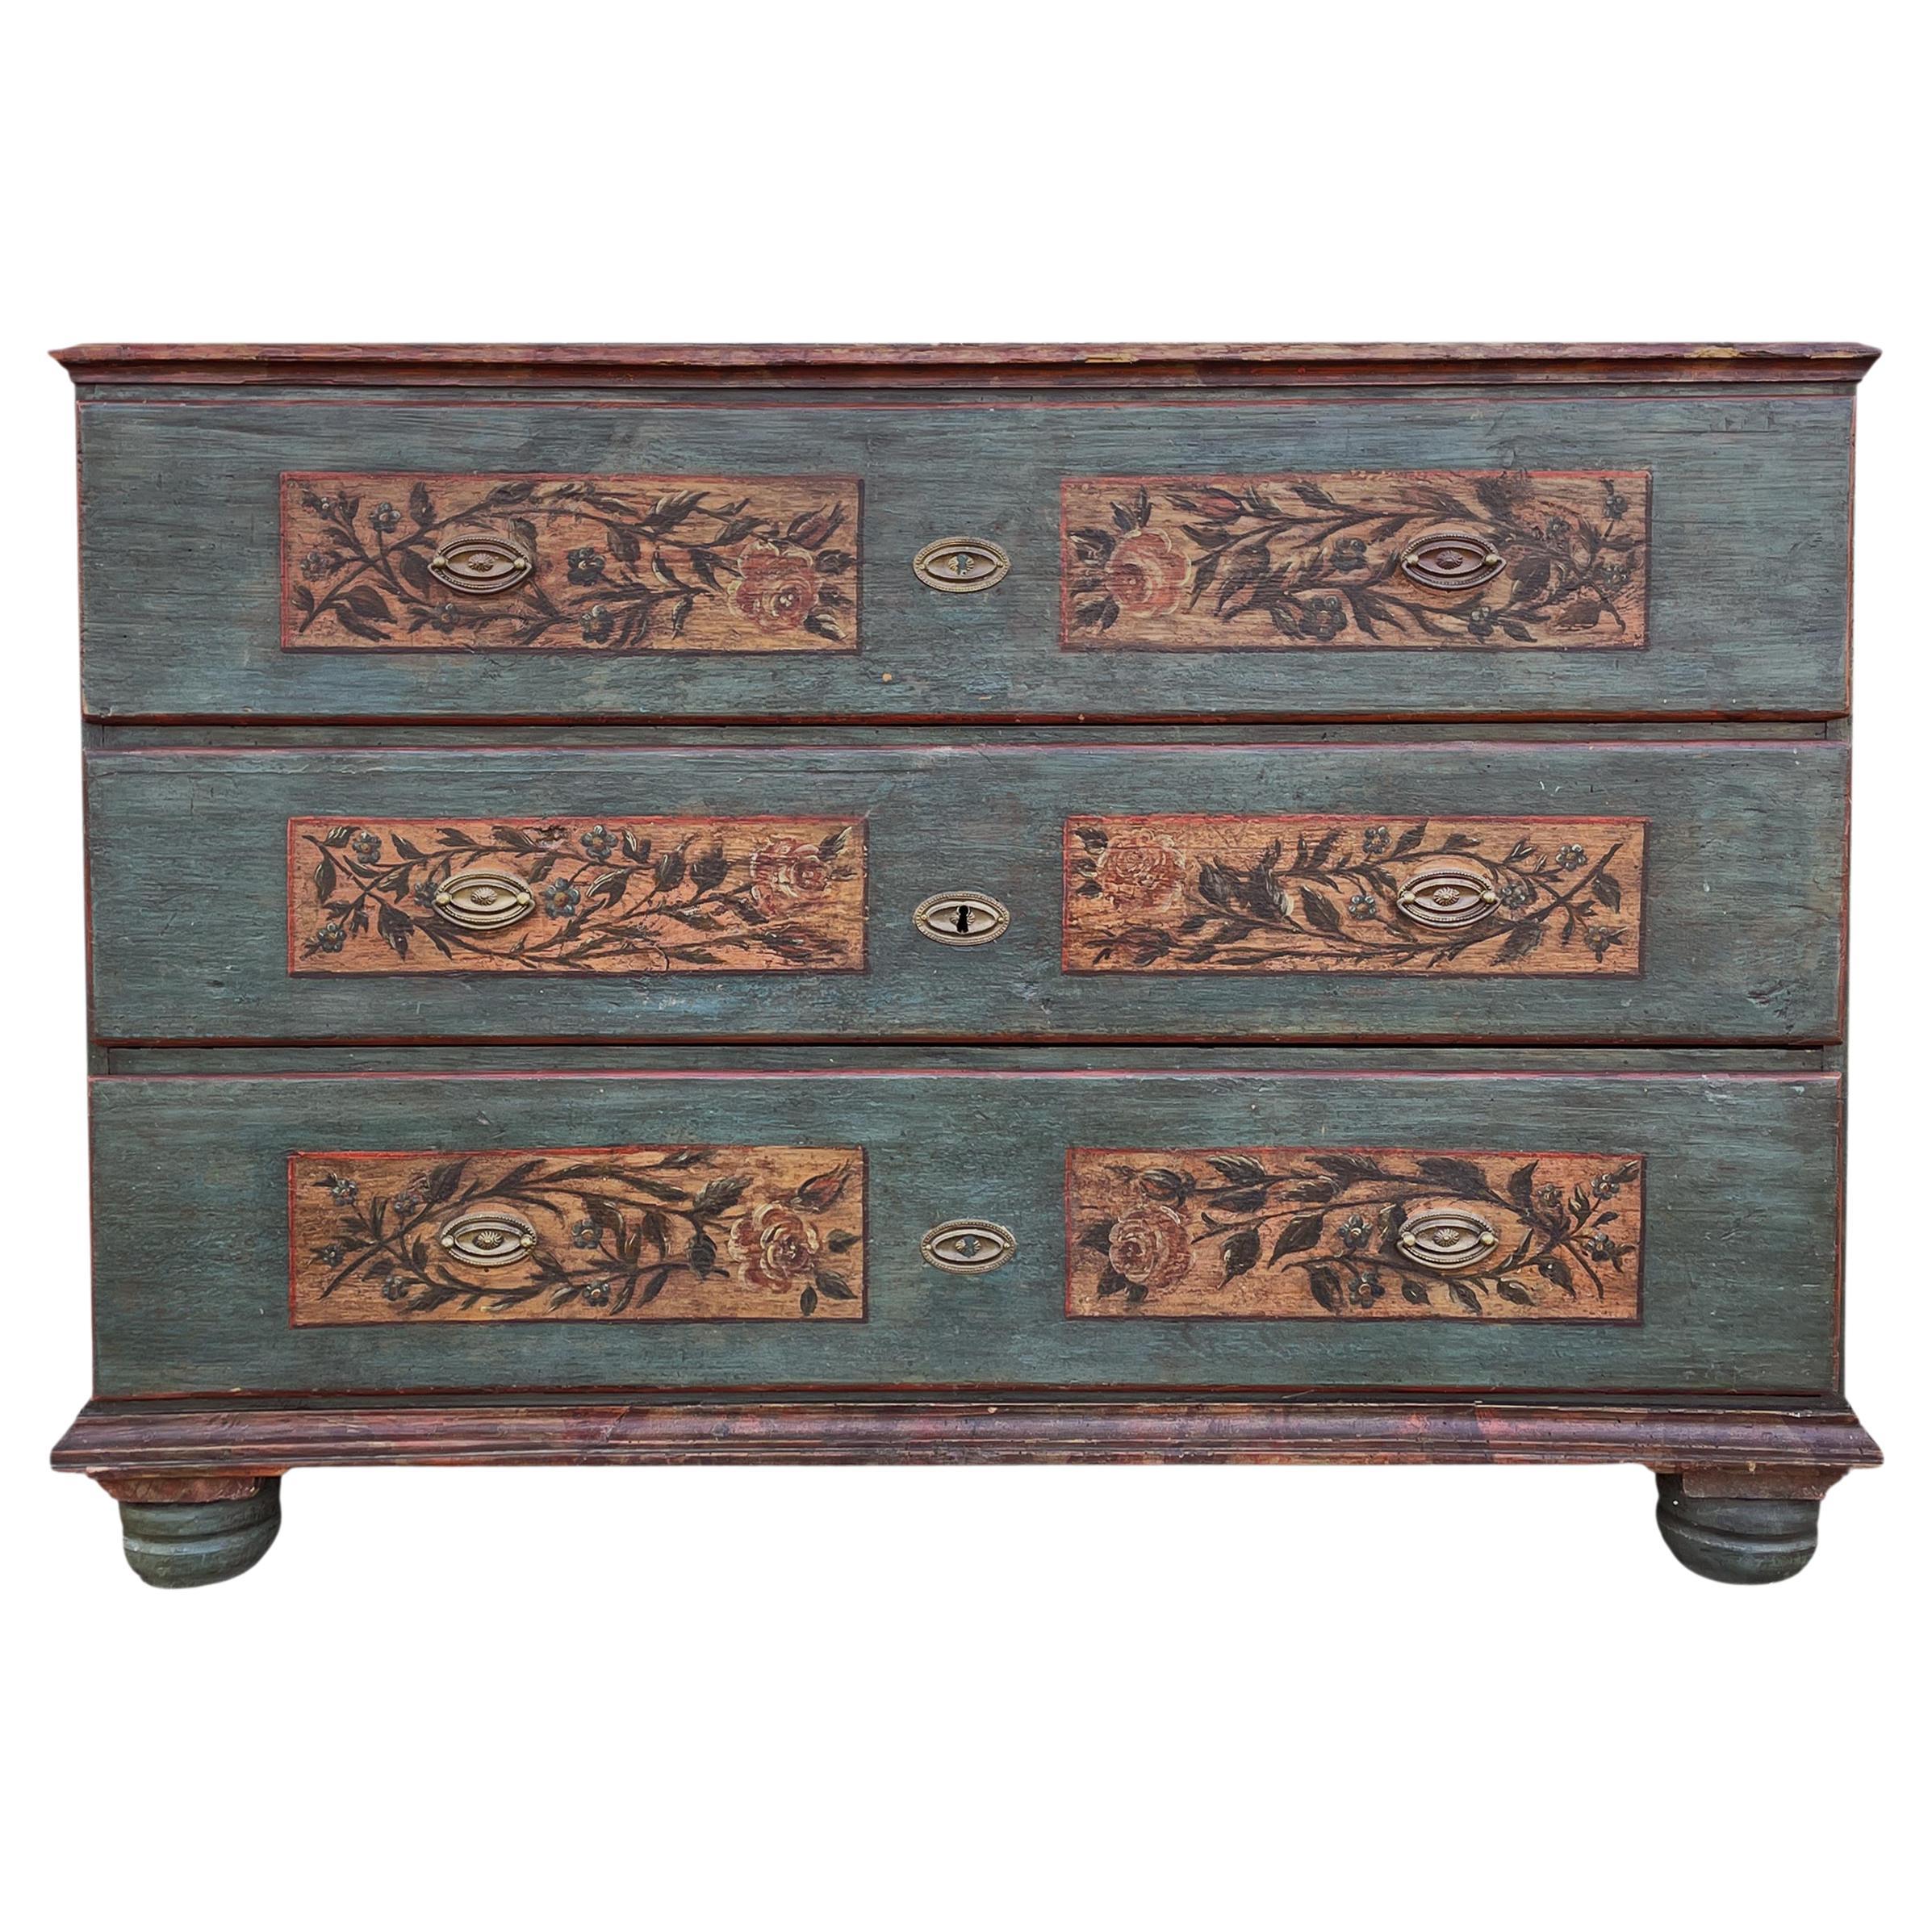 Blu Floral Painted Chest of Drawers, Northern Italy 1810 For Sale